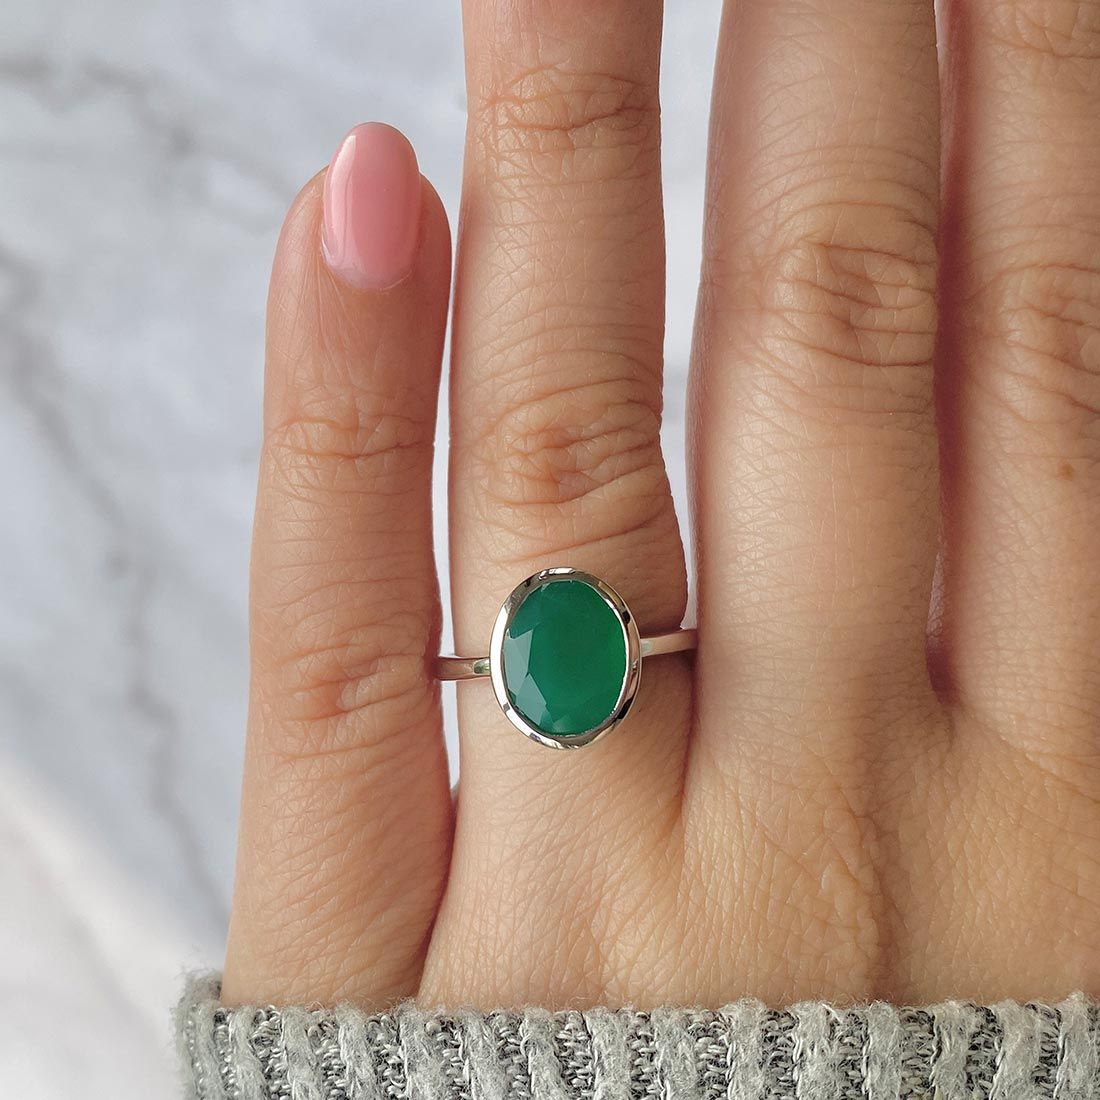 Let's adorn your style with a green onyx ring